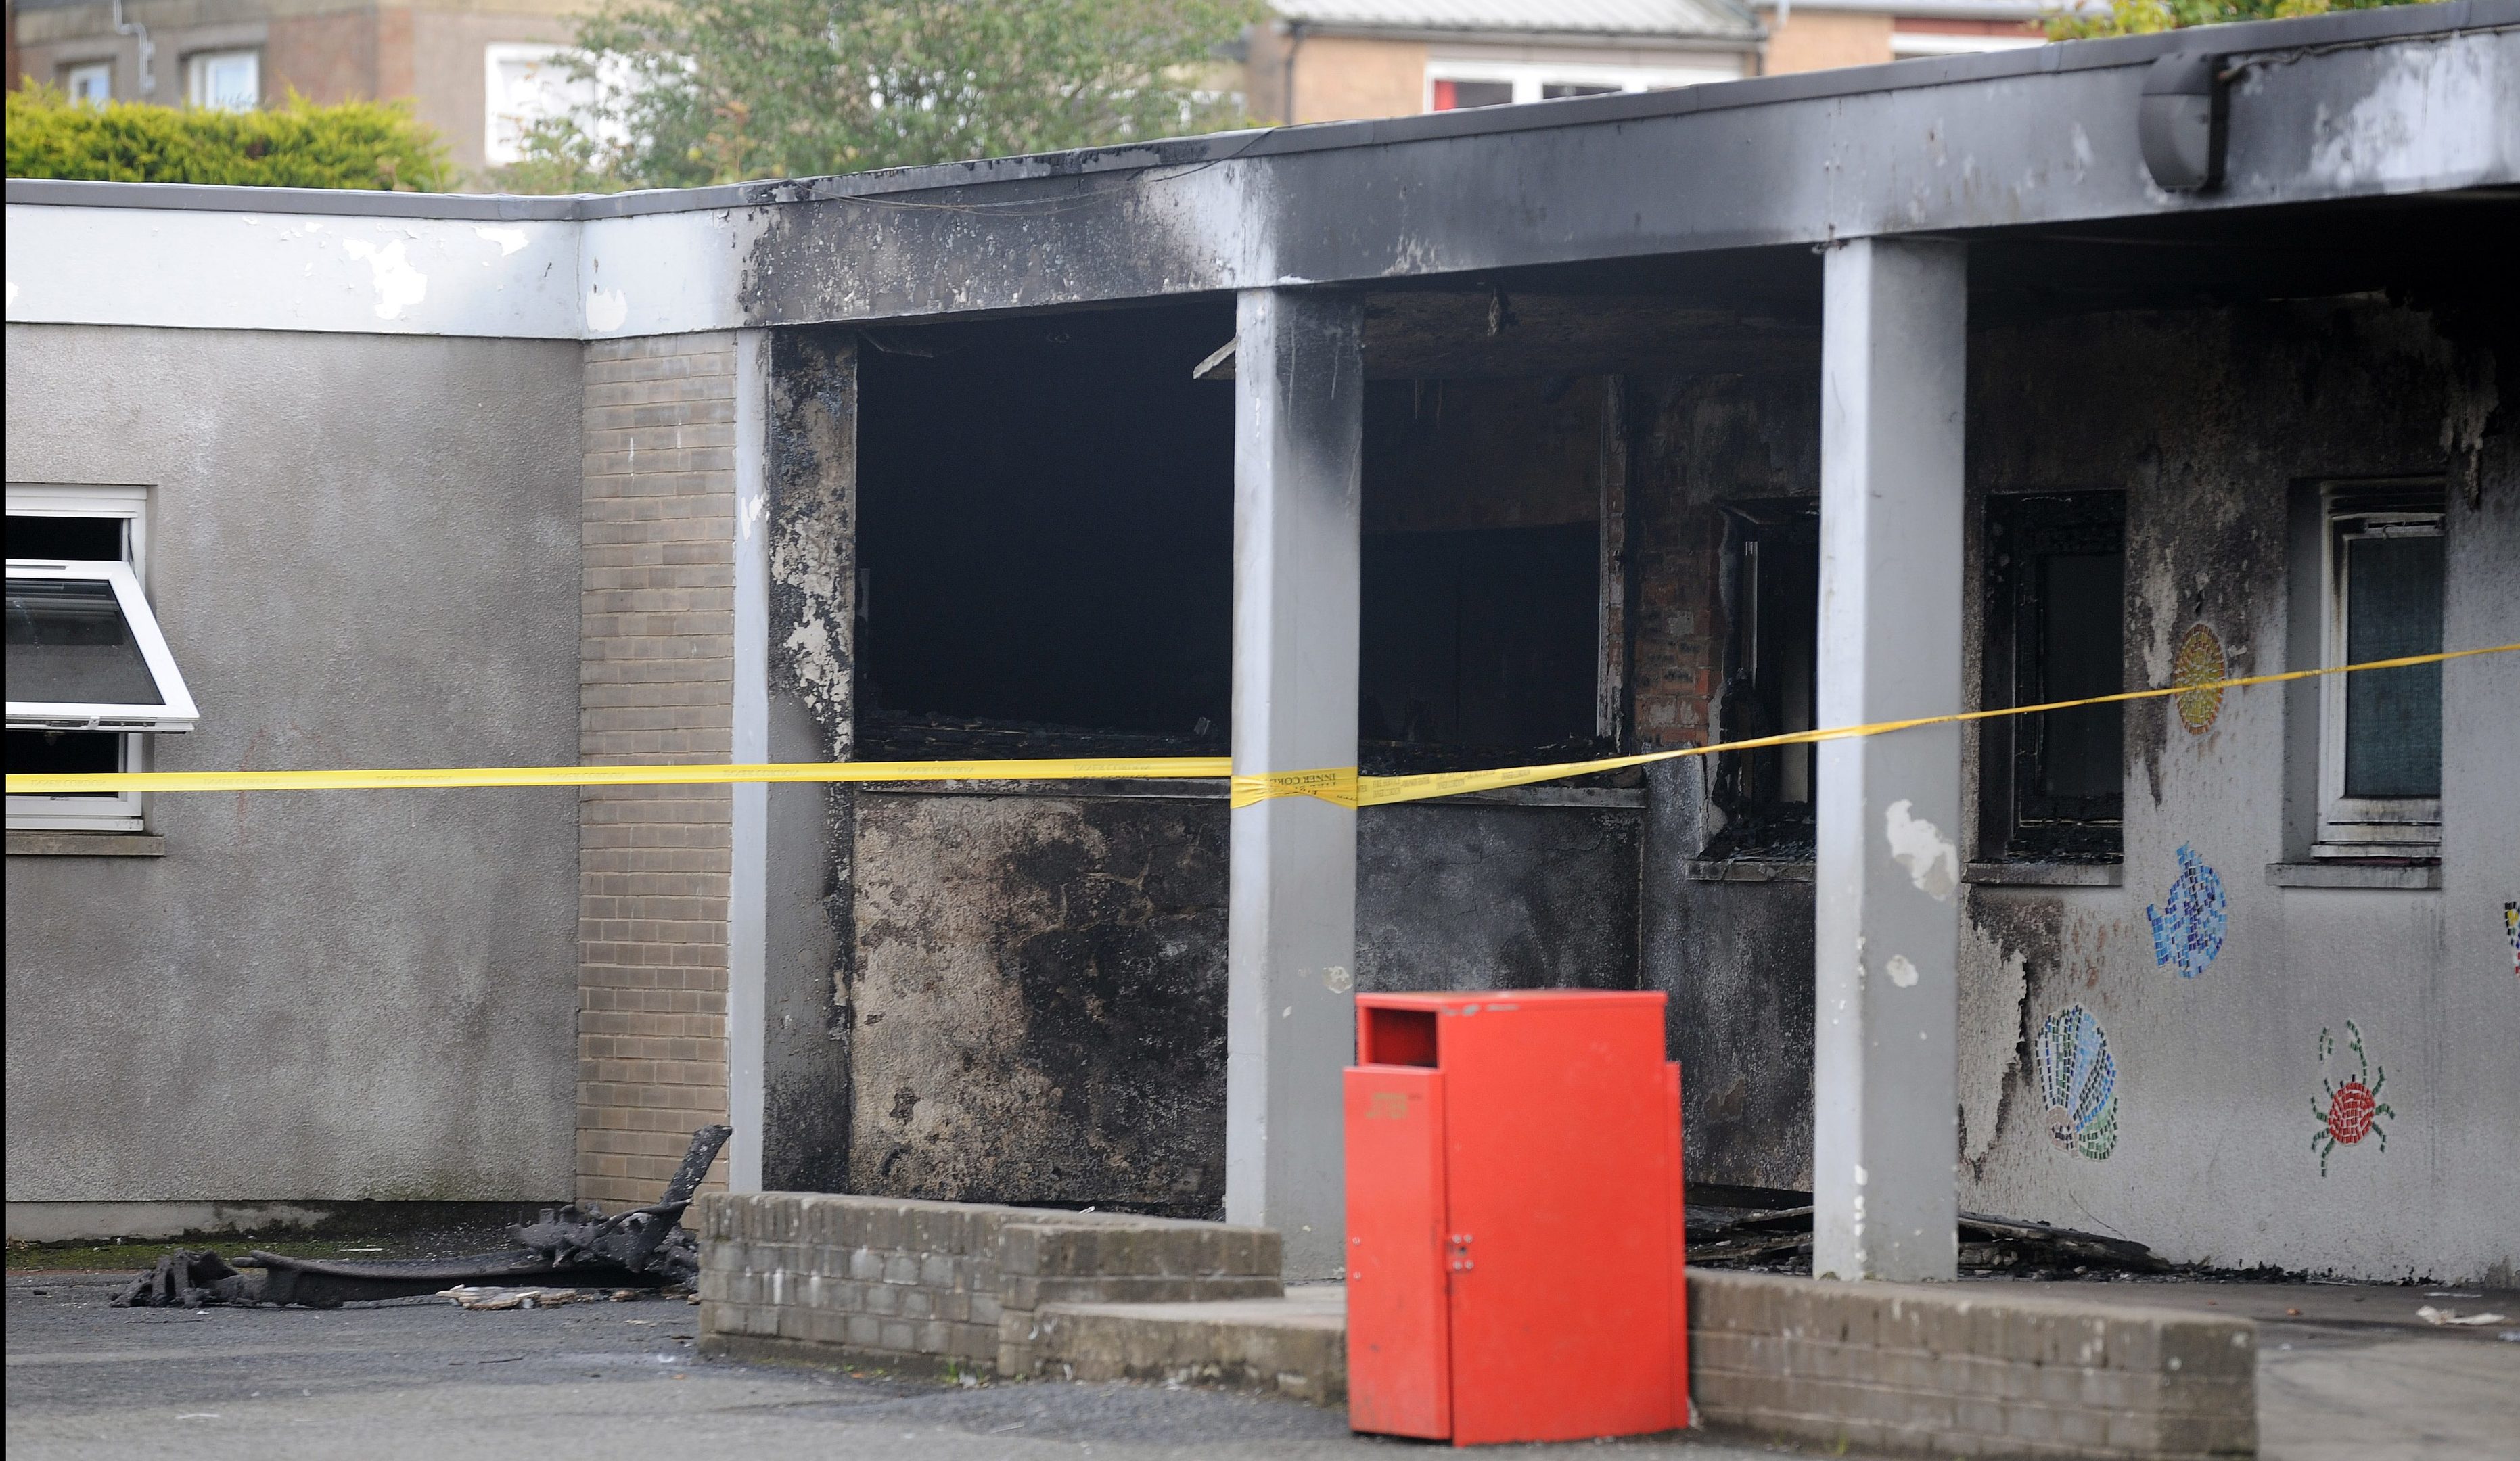 Scene of the fire damage at Torbain Primary